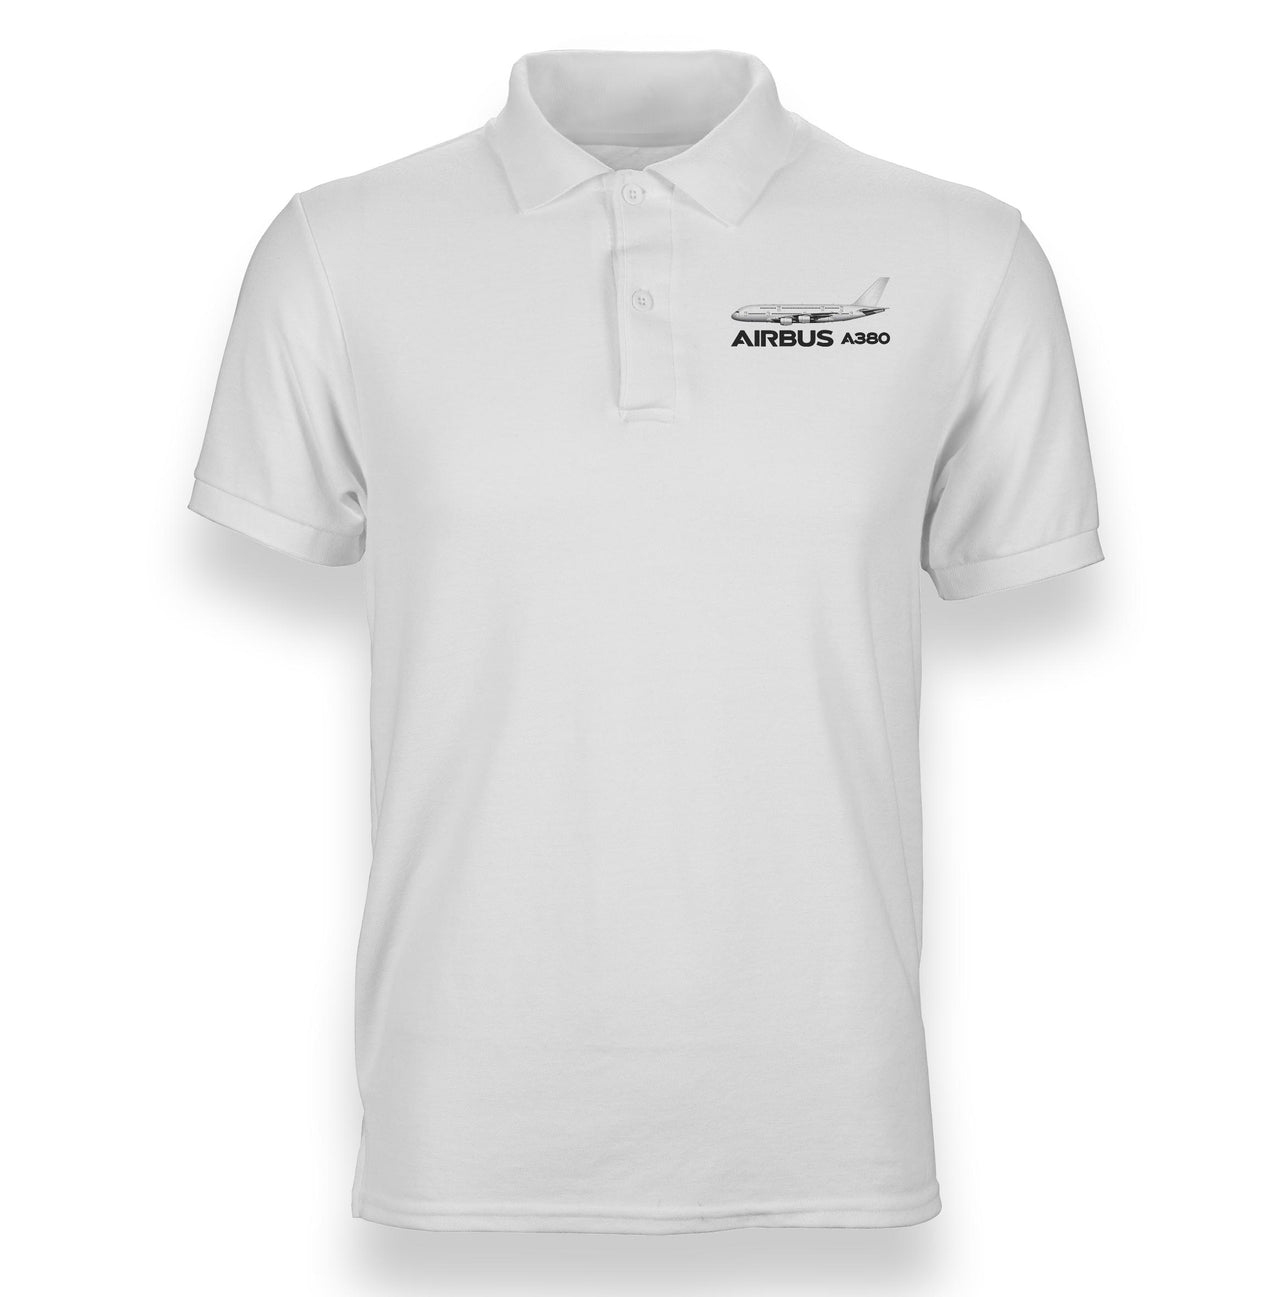 The Airbus A380 Designed Polo T-Shirts